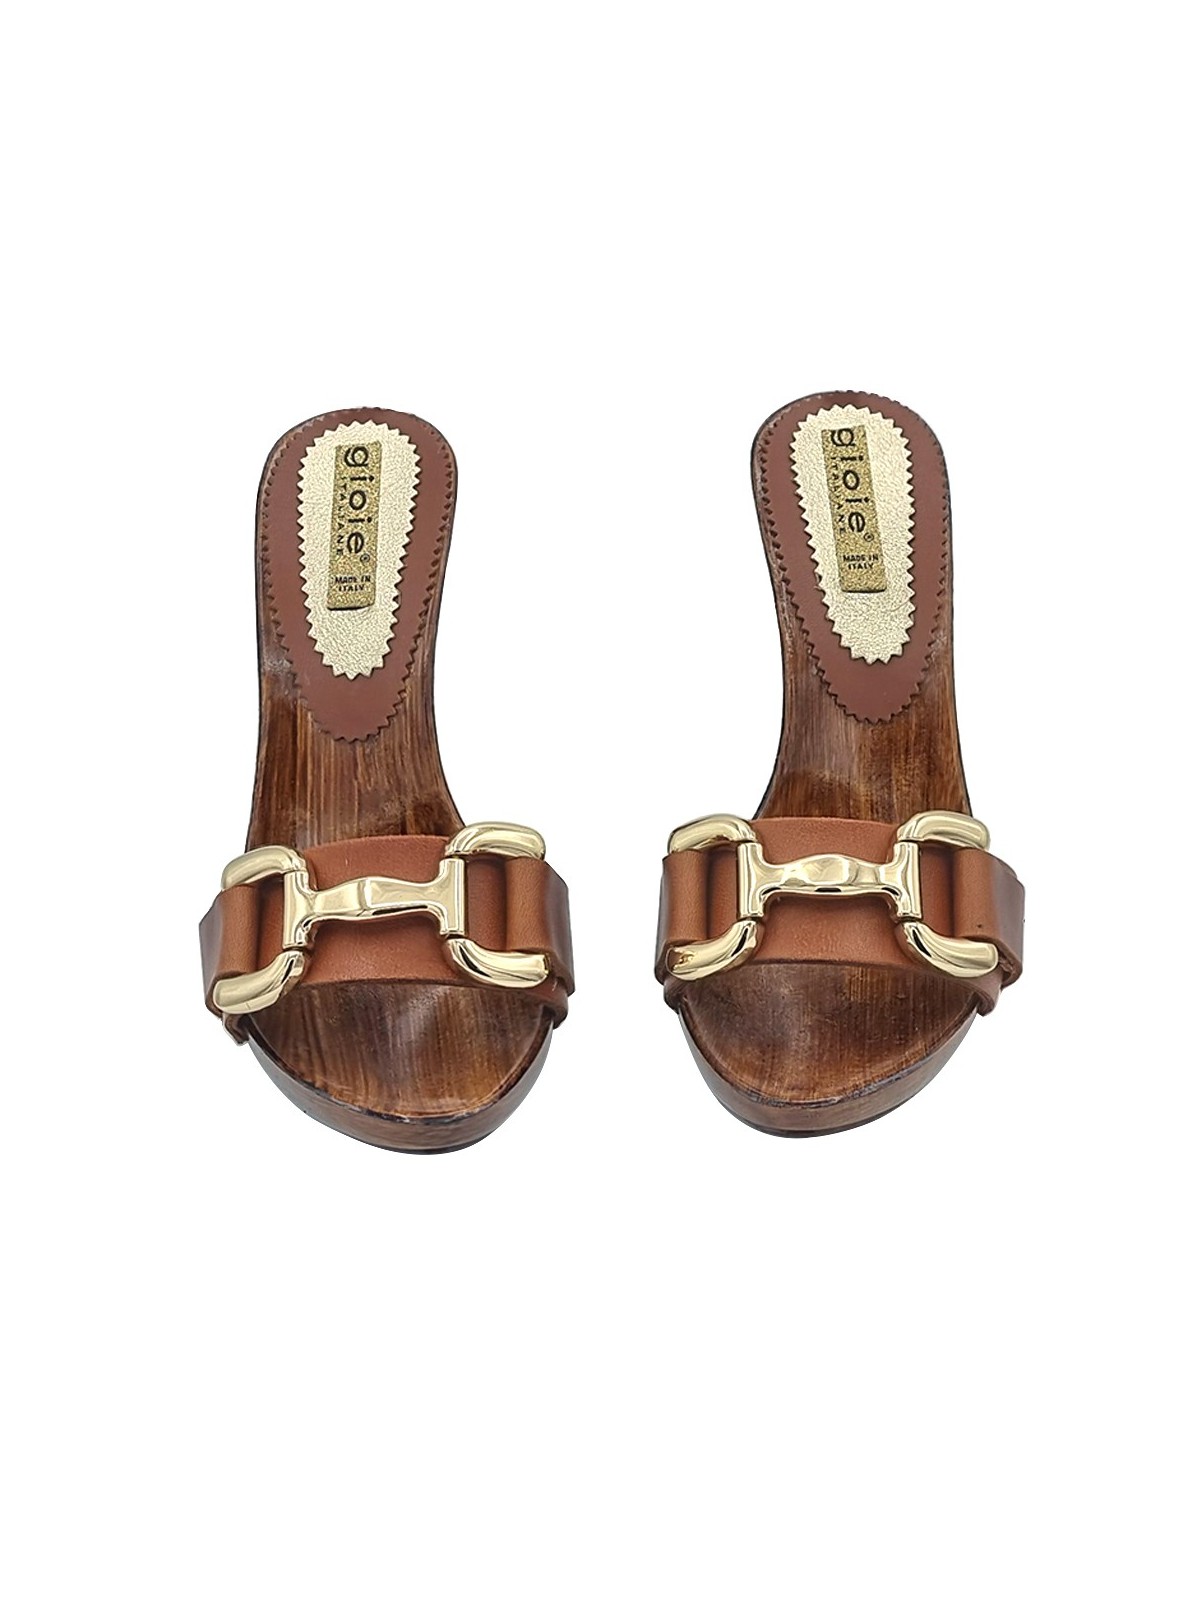 LEATHER-COLORED CLOGS WITH HEEL 12